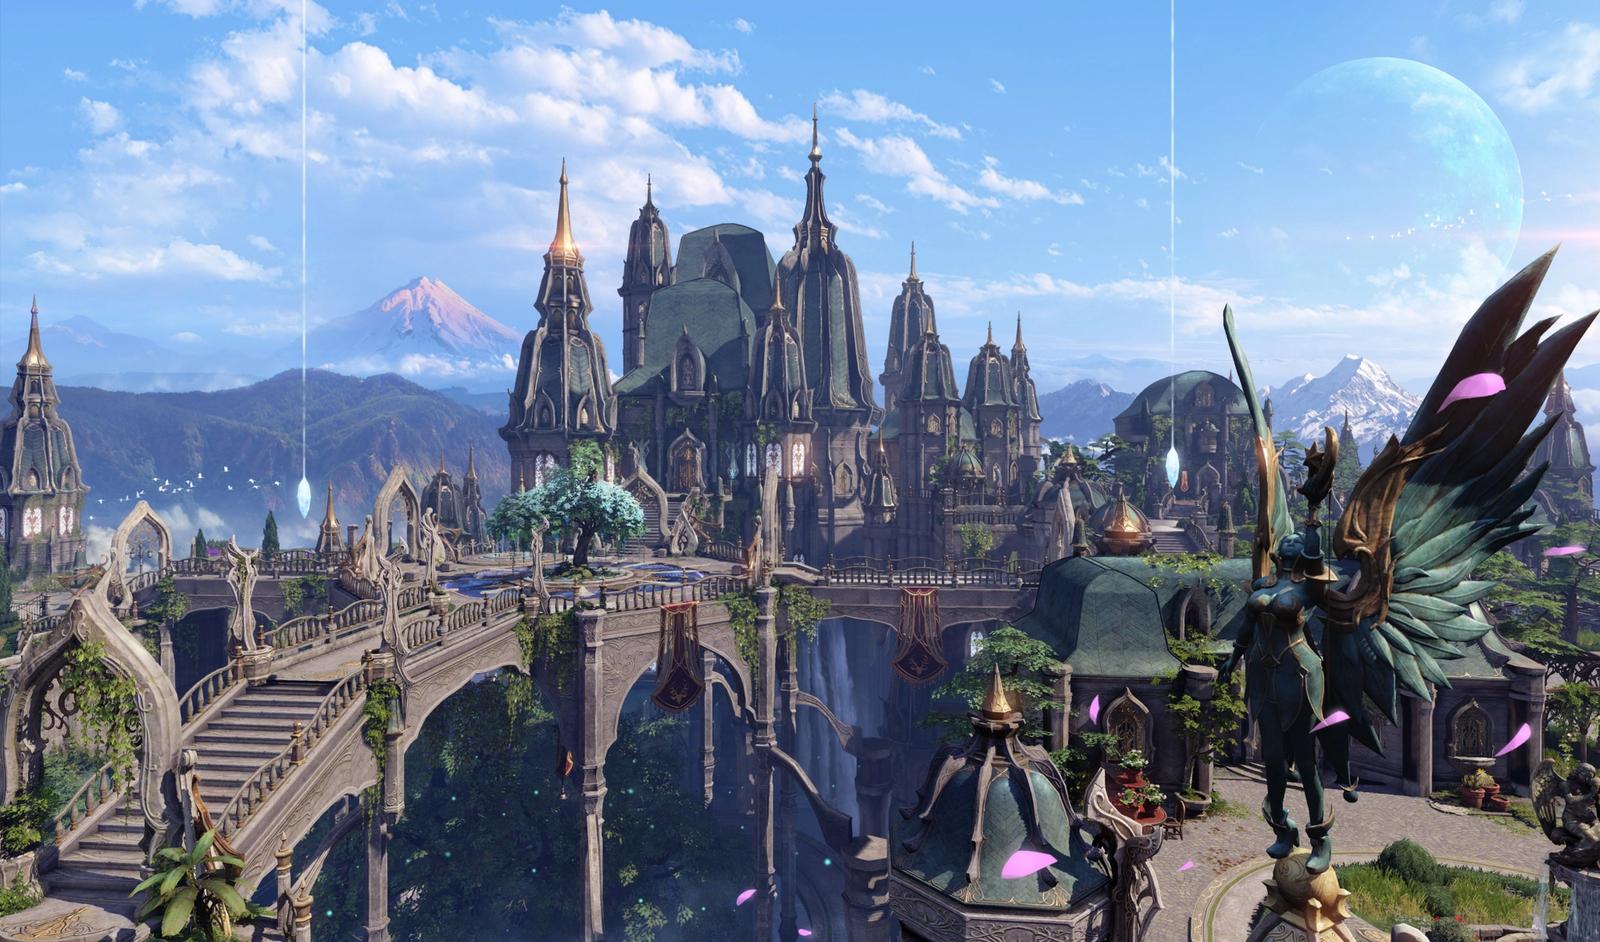 A character overlooks a city in Lost Ark.